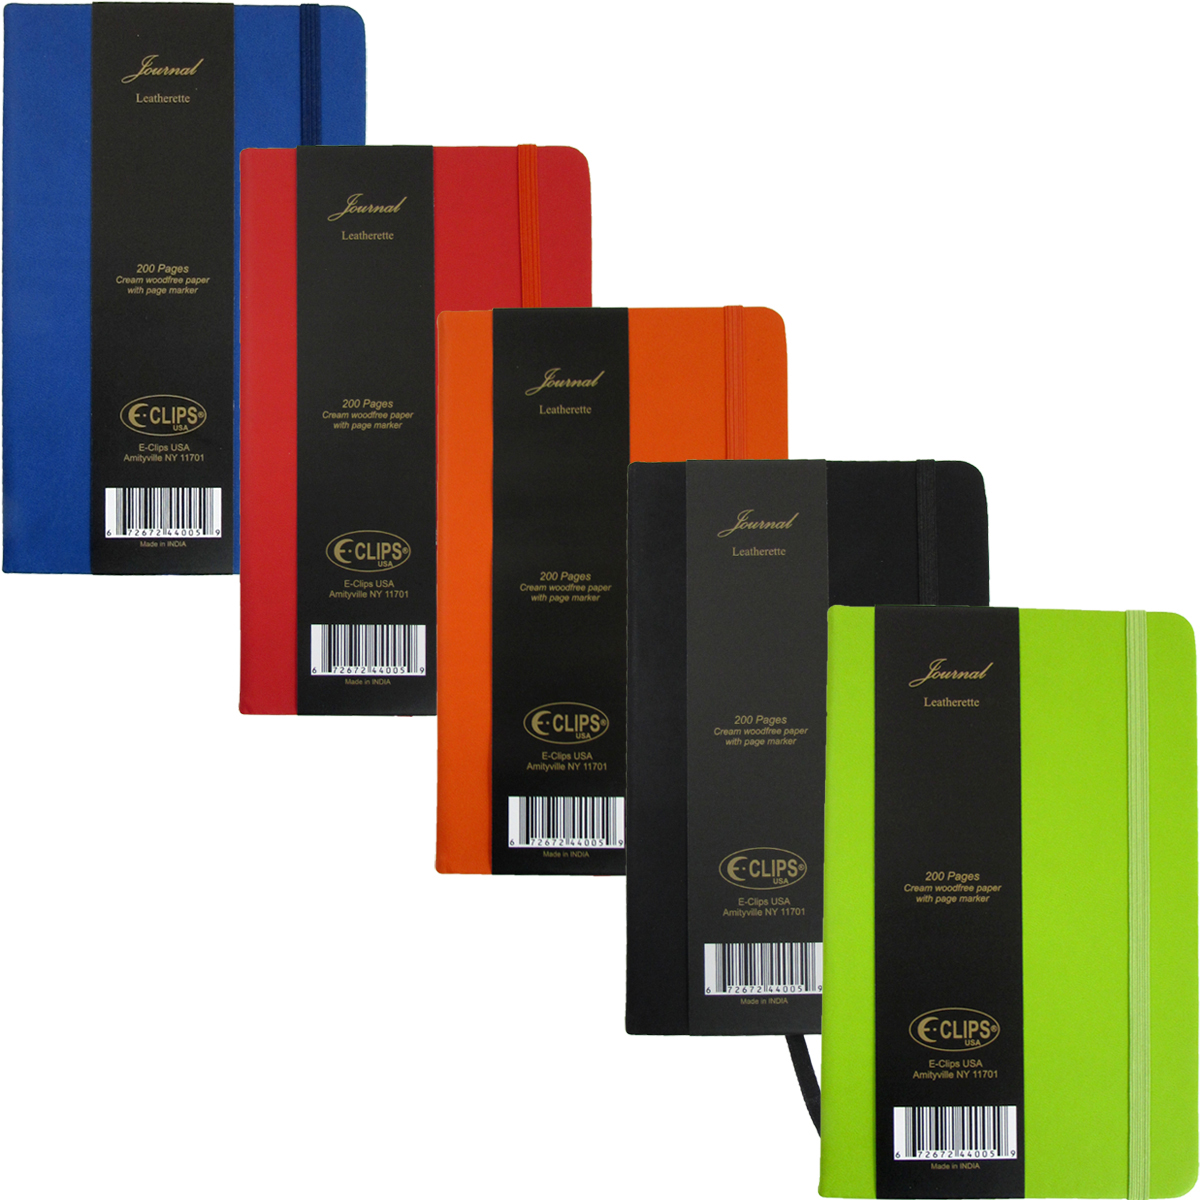 Hardcover Faux Leather Journals w/ Elastic Band Closure & Page Marker